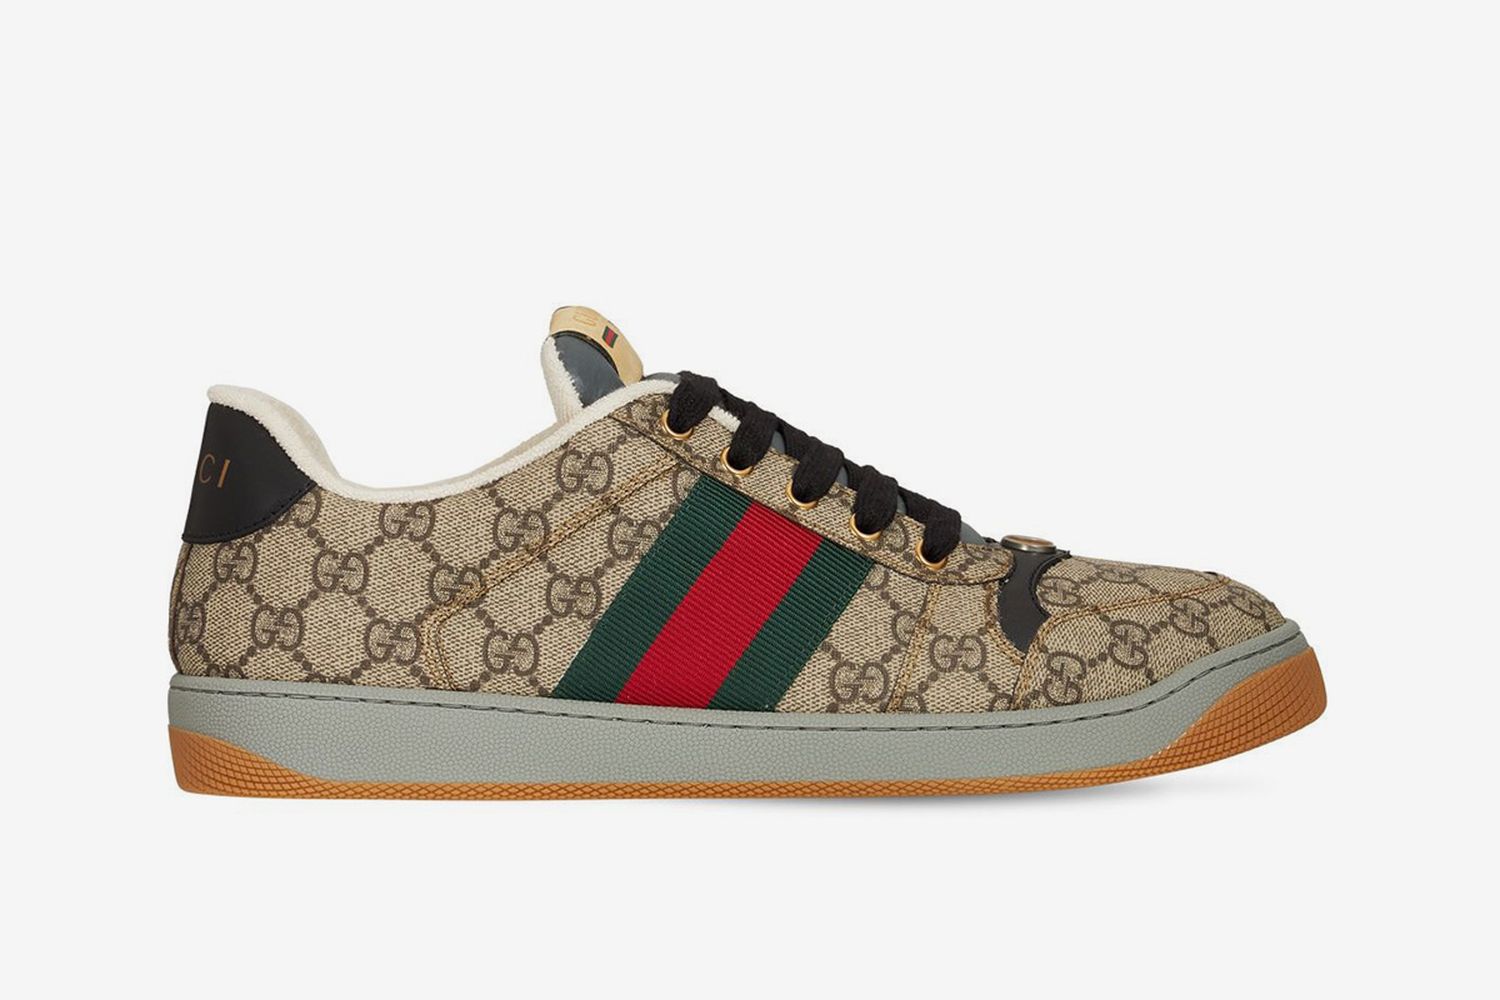 The Ultimate Guide to Gucci Sneakers & Where to Buy Them